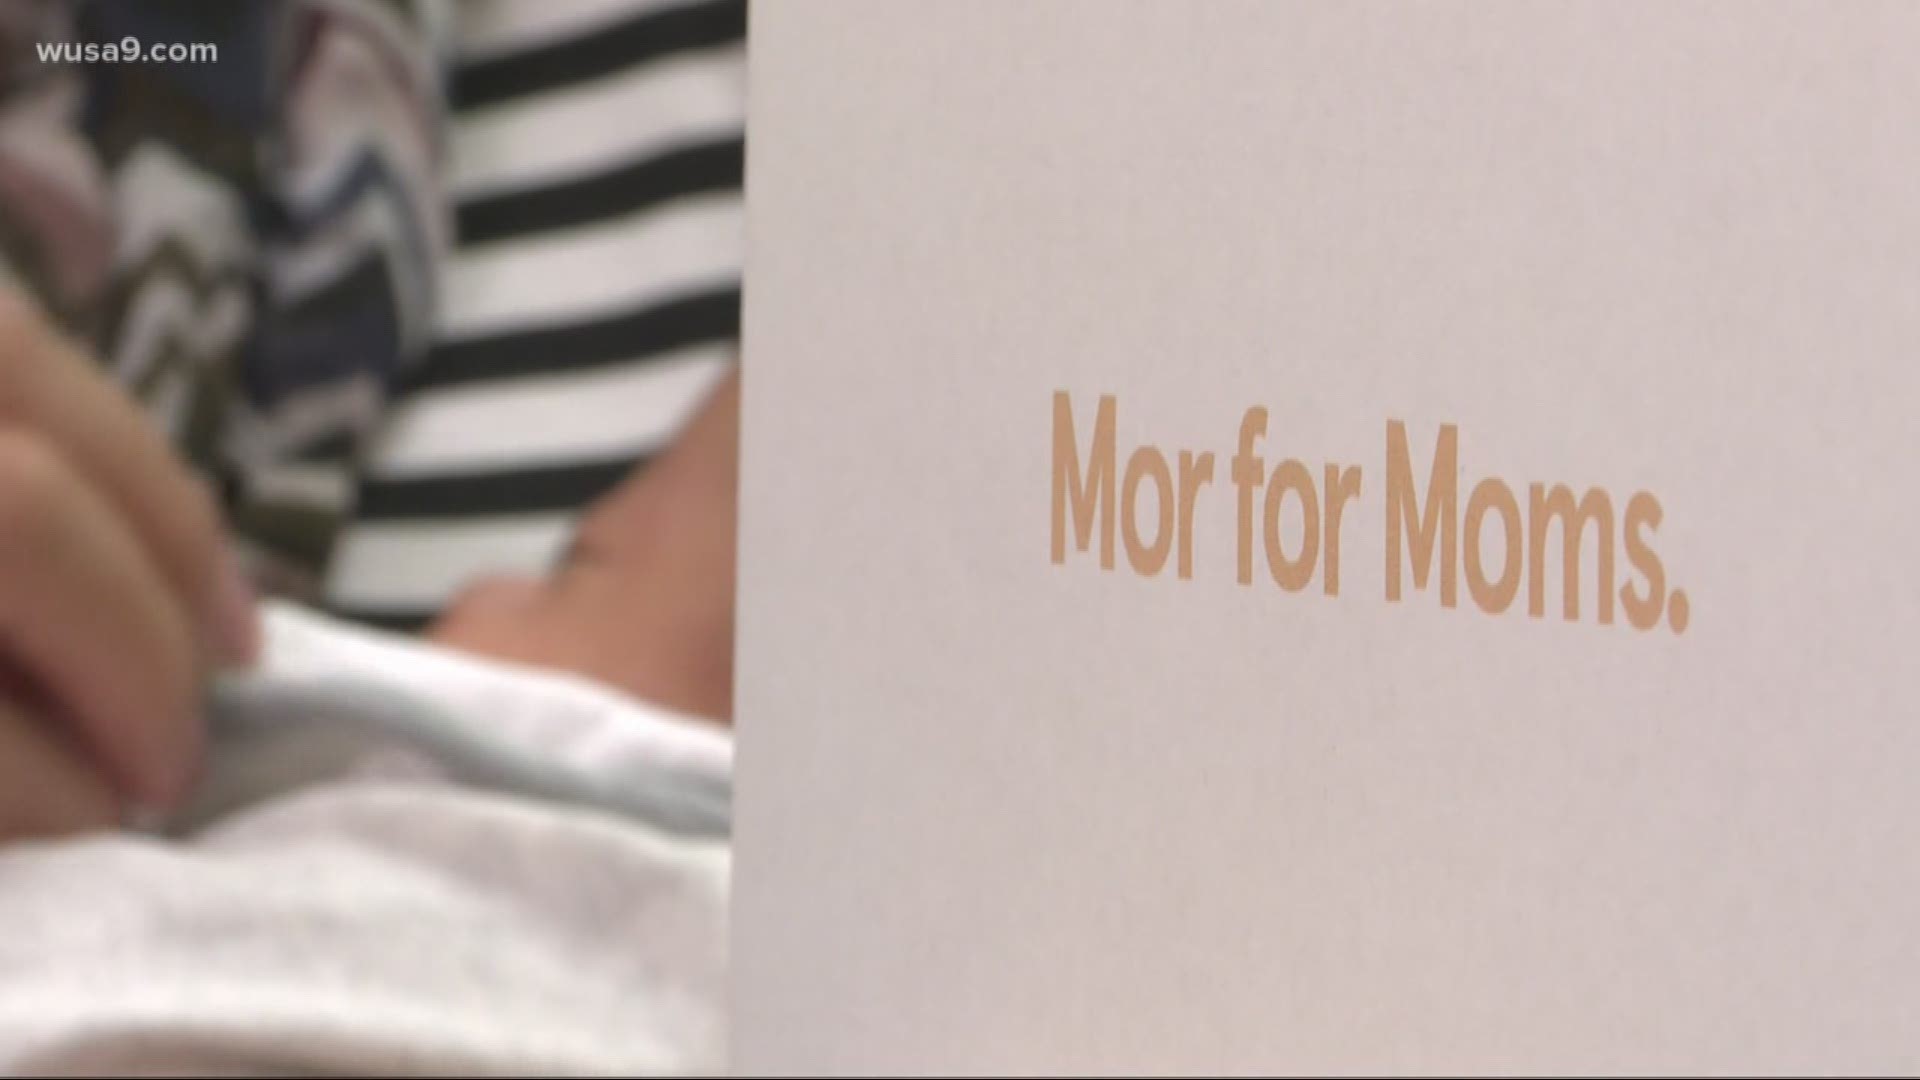 Mor For Moms created a box that has all the supplies new moms need for when they take their newborns home.